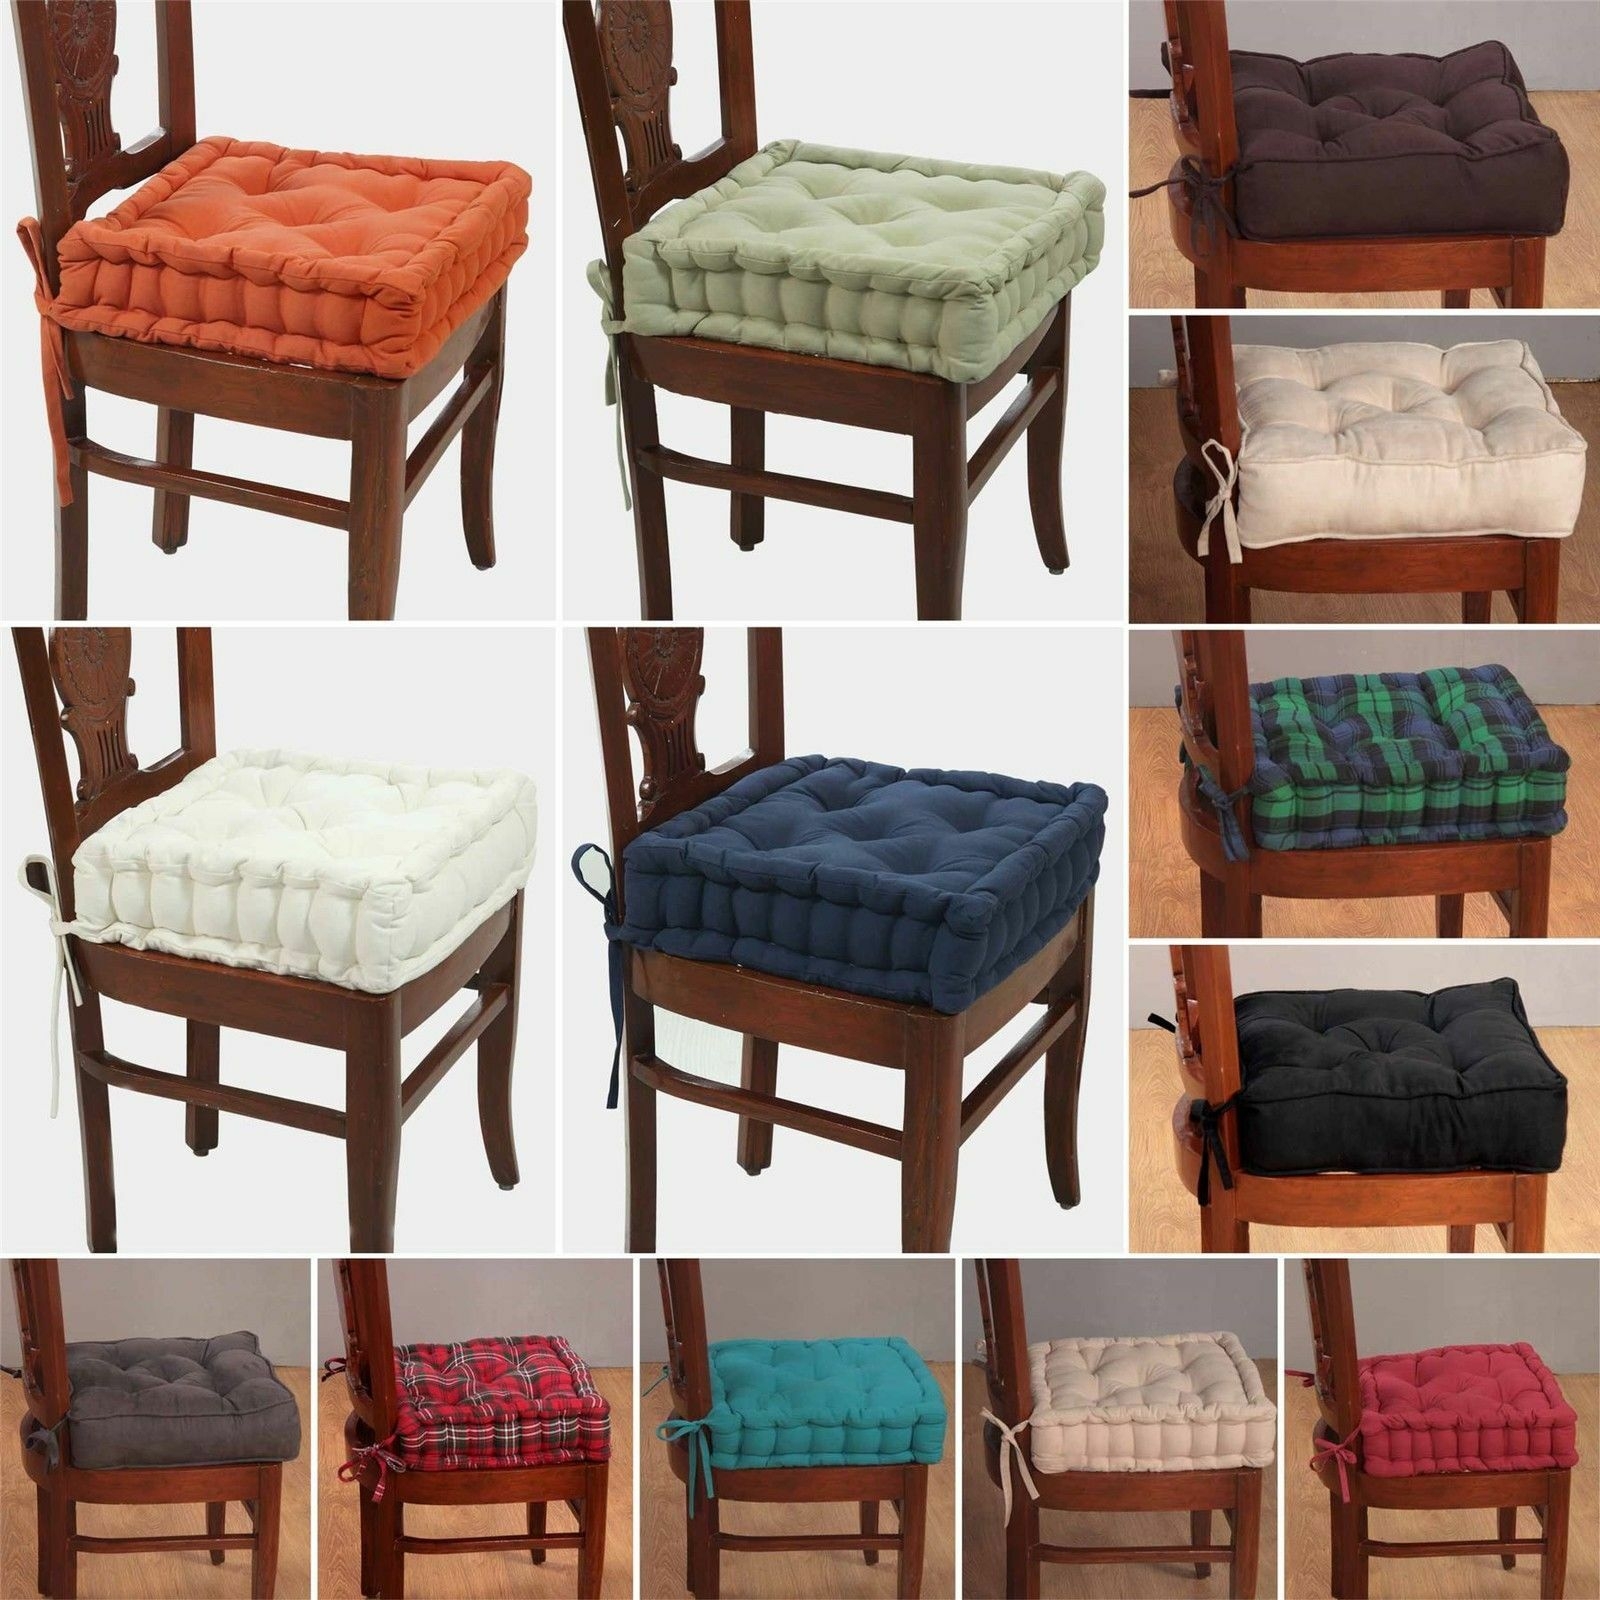 Chair Pads With Ties Visualhunt - Dining Room Chair Seat Cushions With Ties